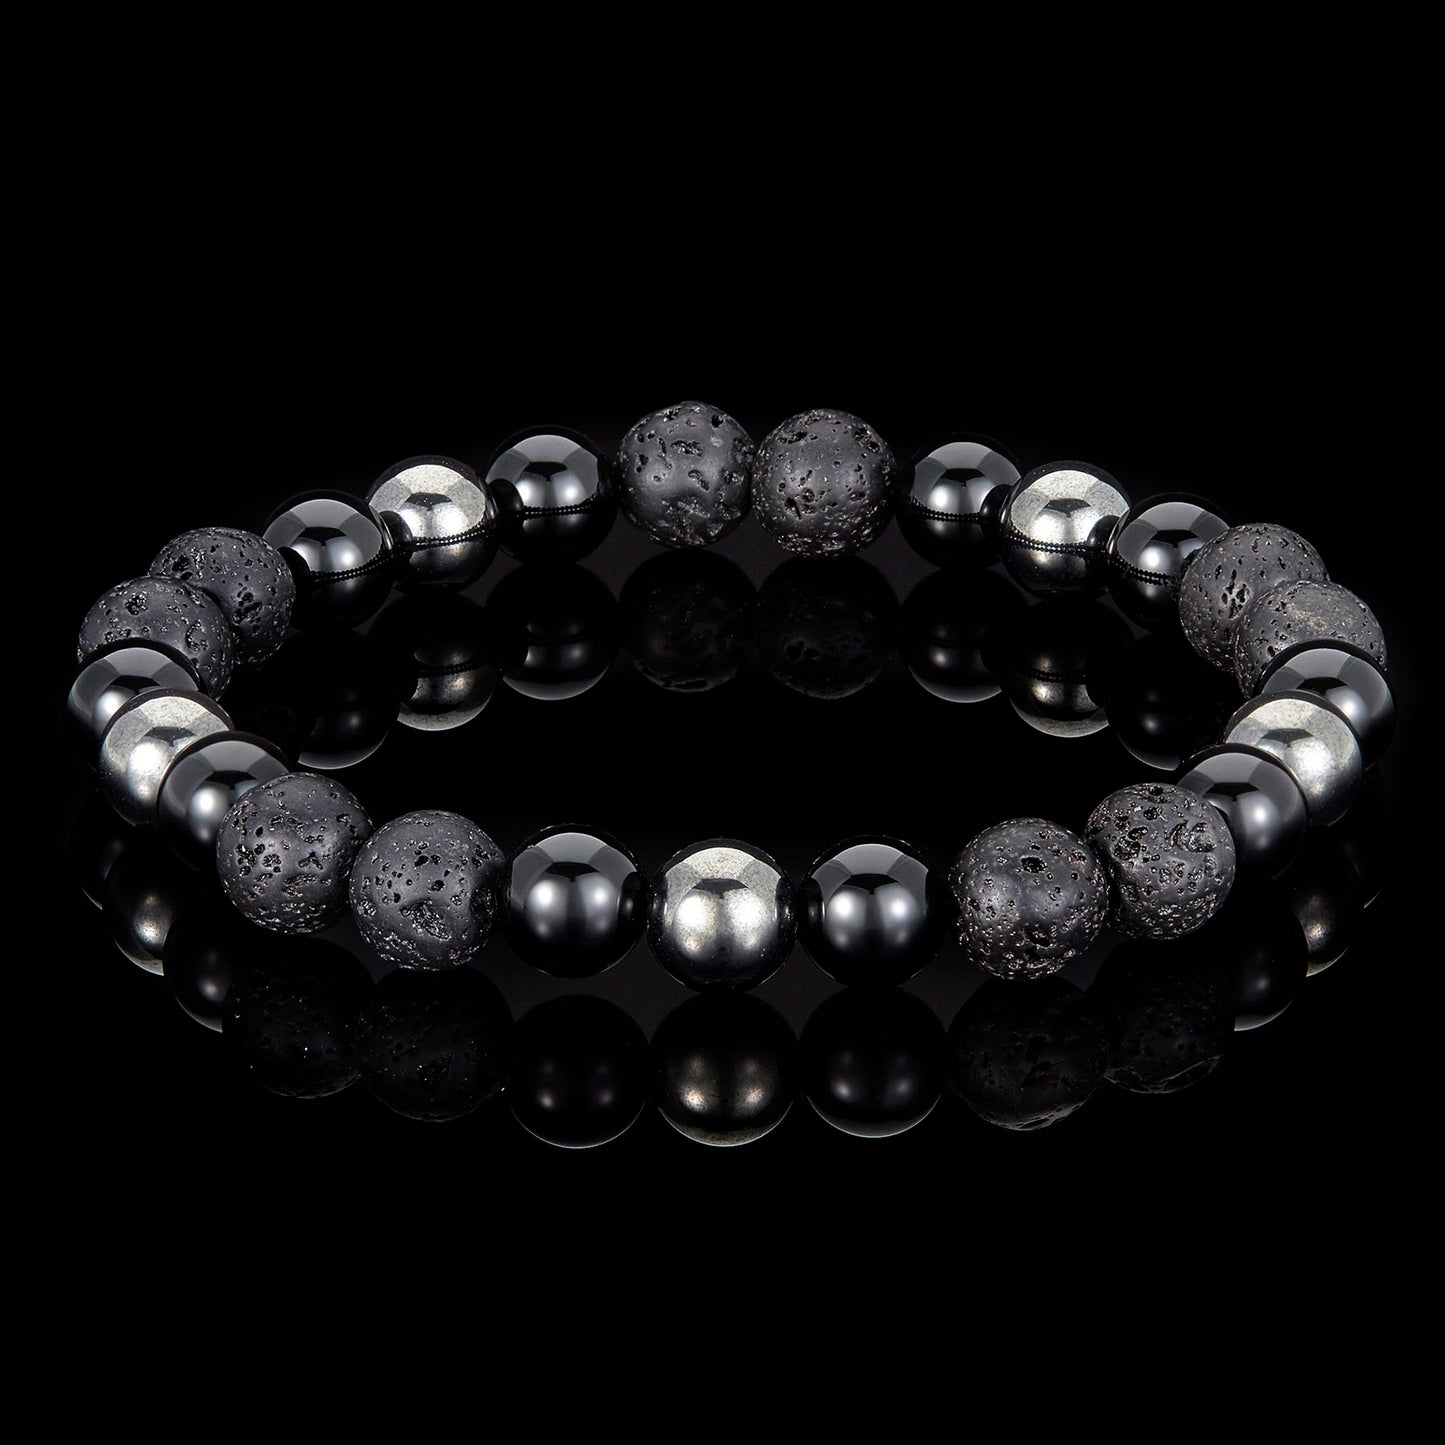 Unisex 20 Piece 8mm Natural Stones with Magnetic Hematite and Onyx Stretch Bracelet Pack